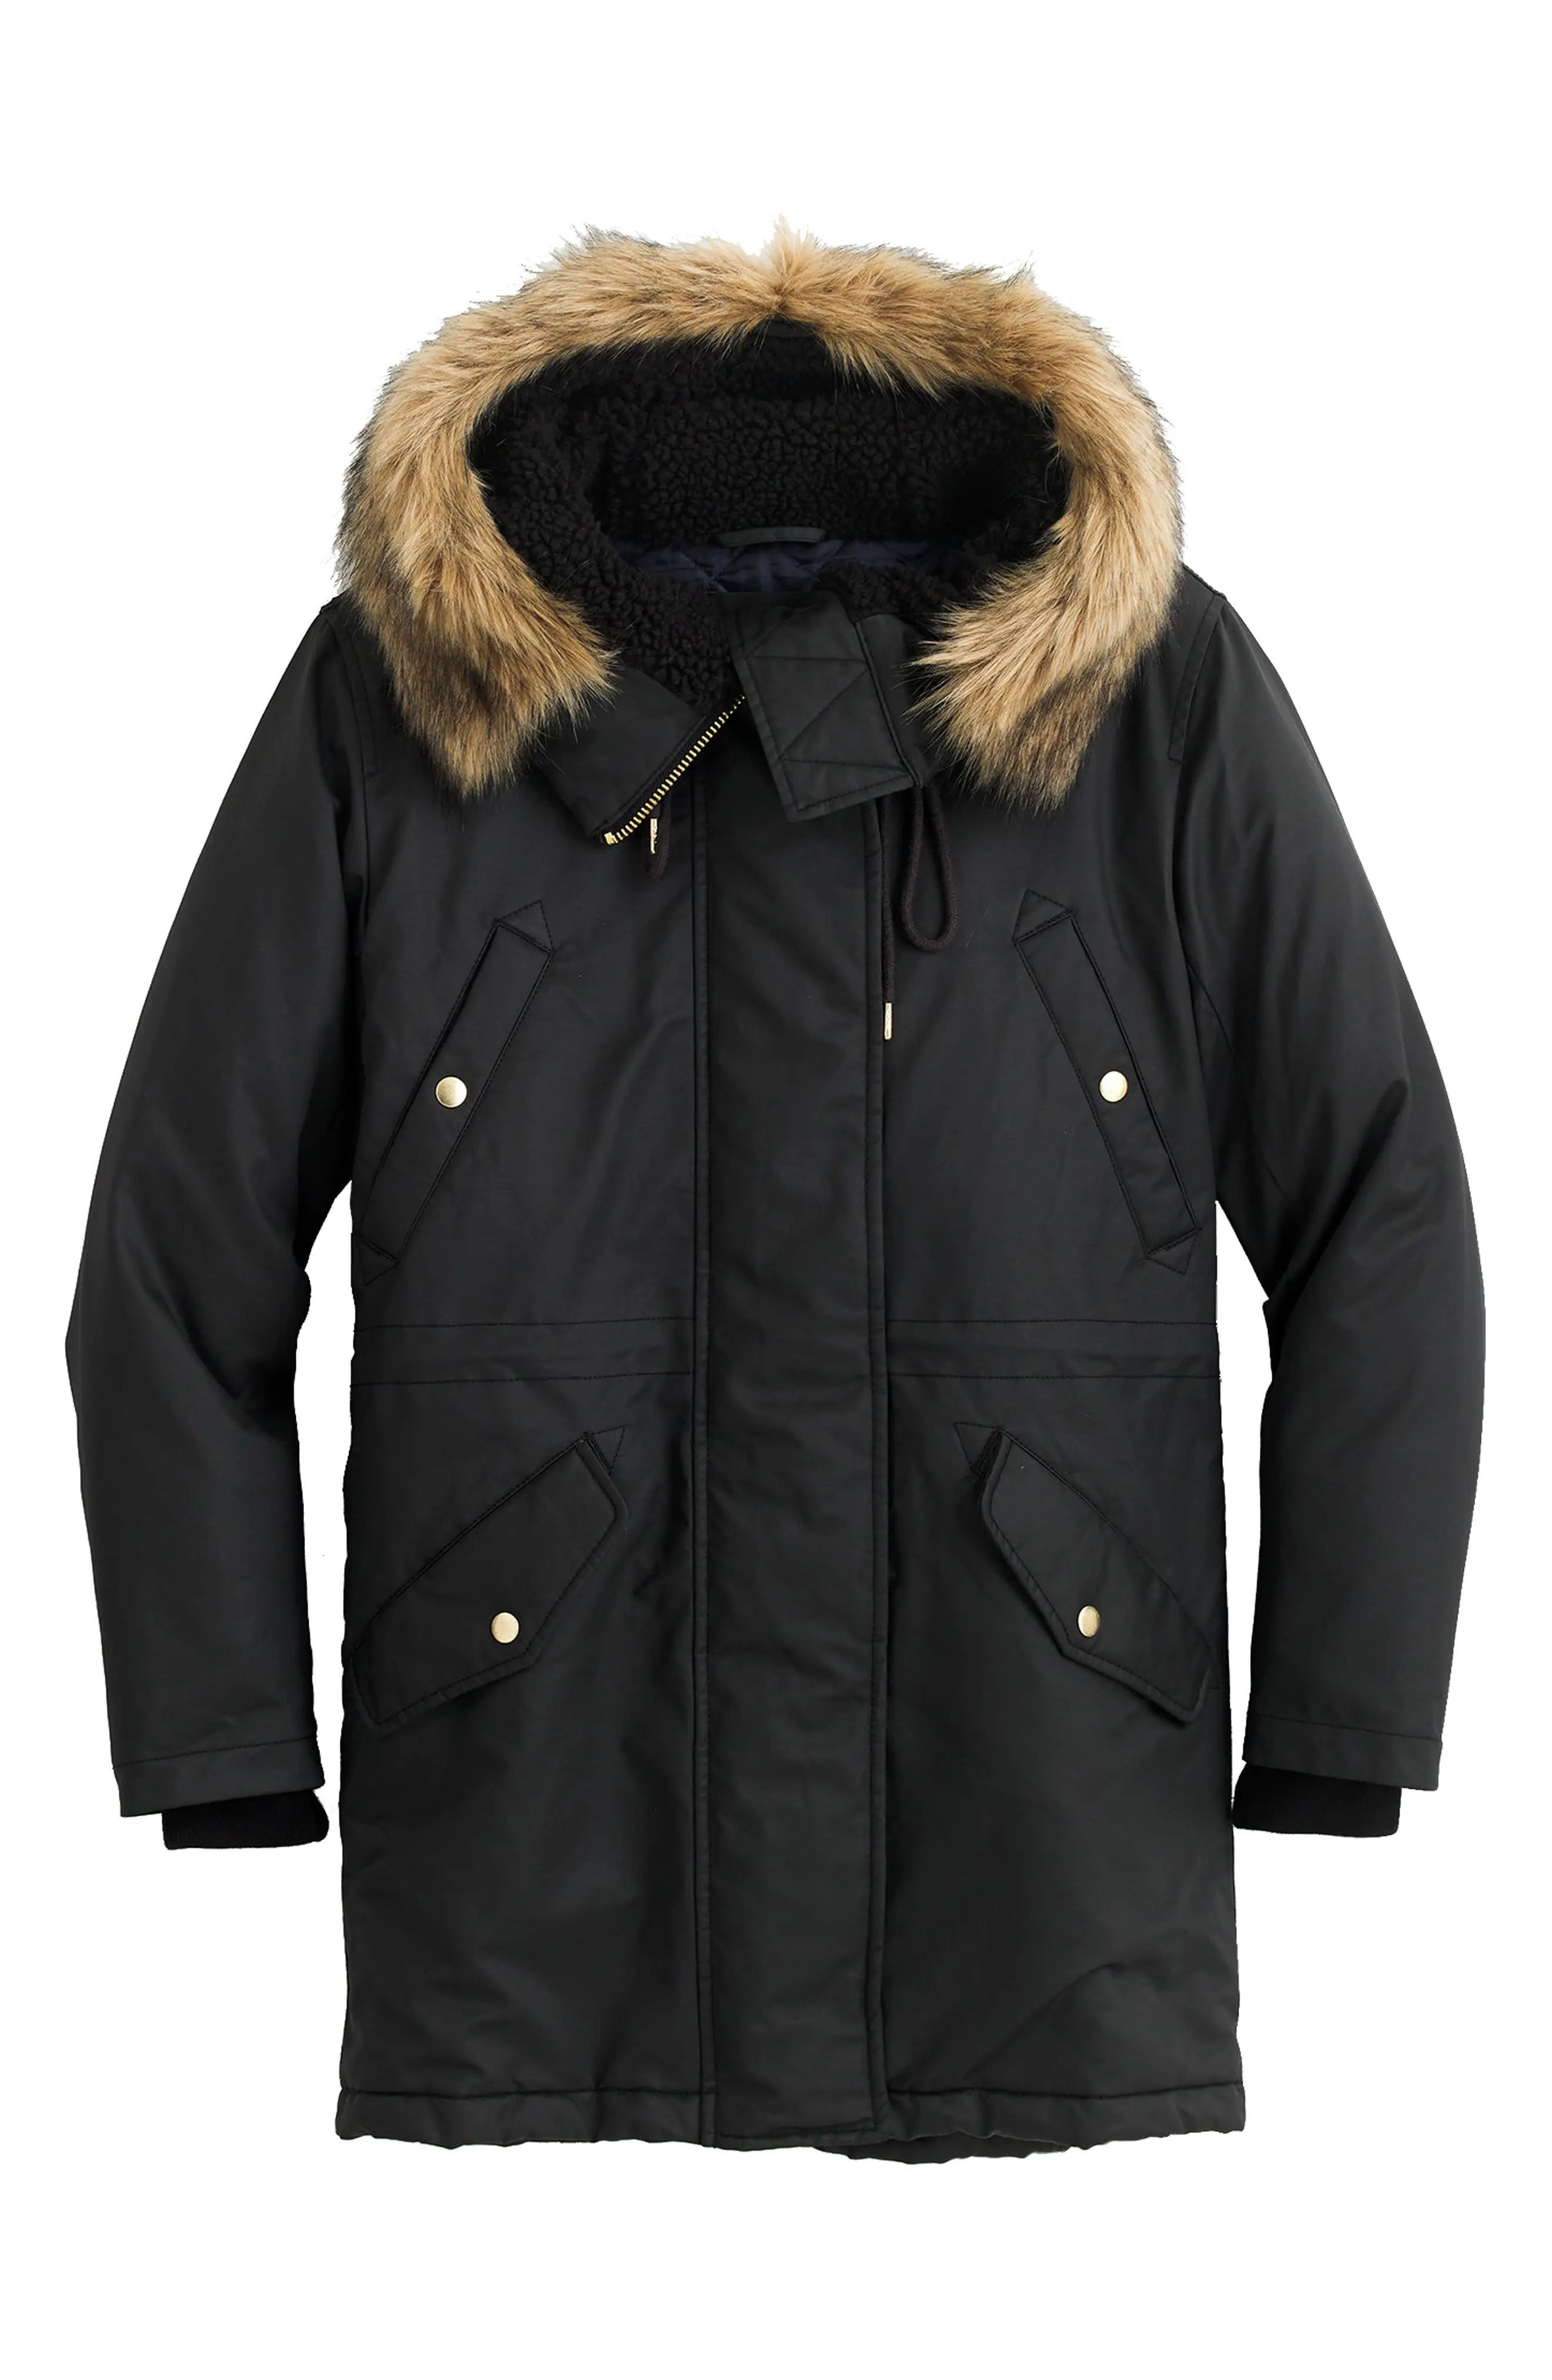 Perfect Winter Parka with Faux Fur Trim | Nordstrom